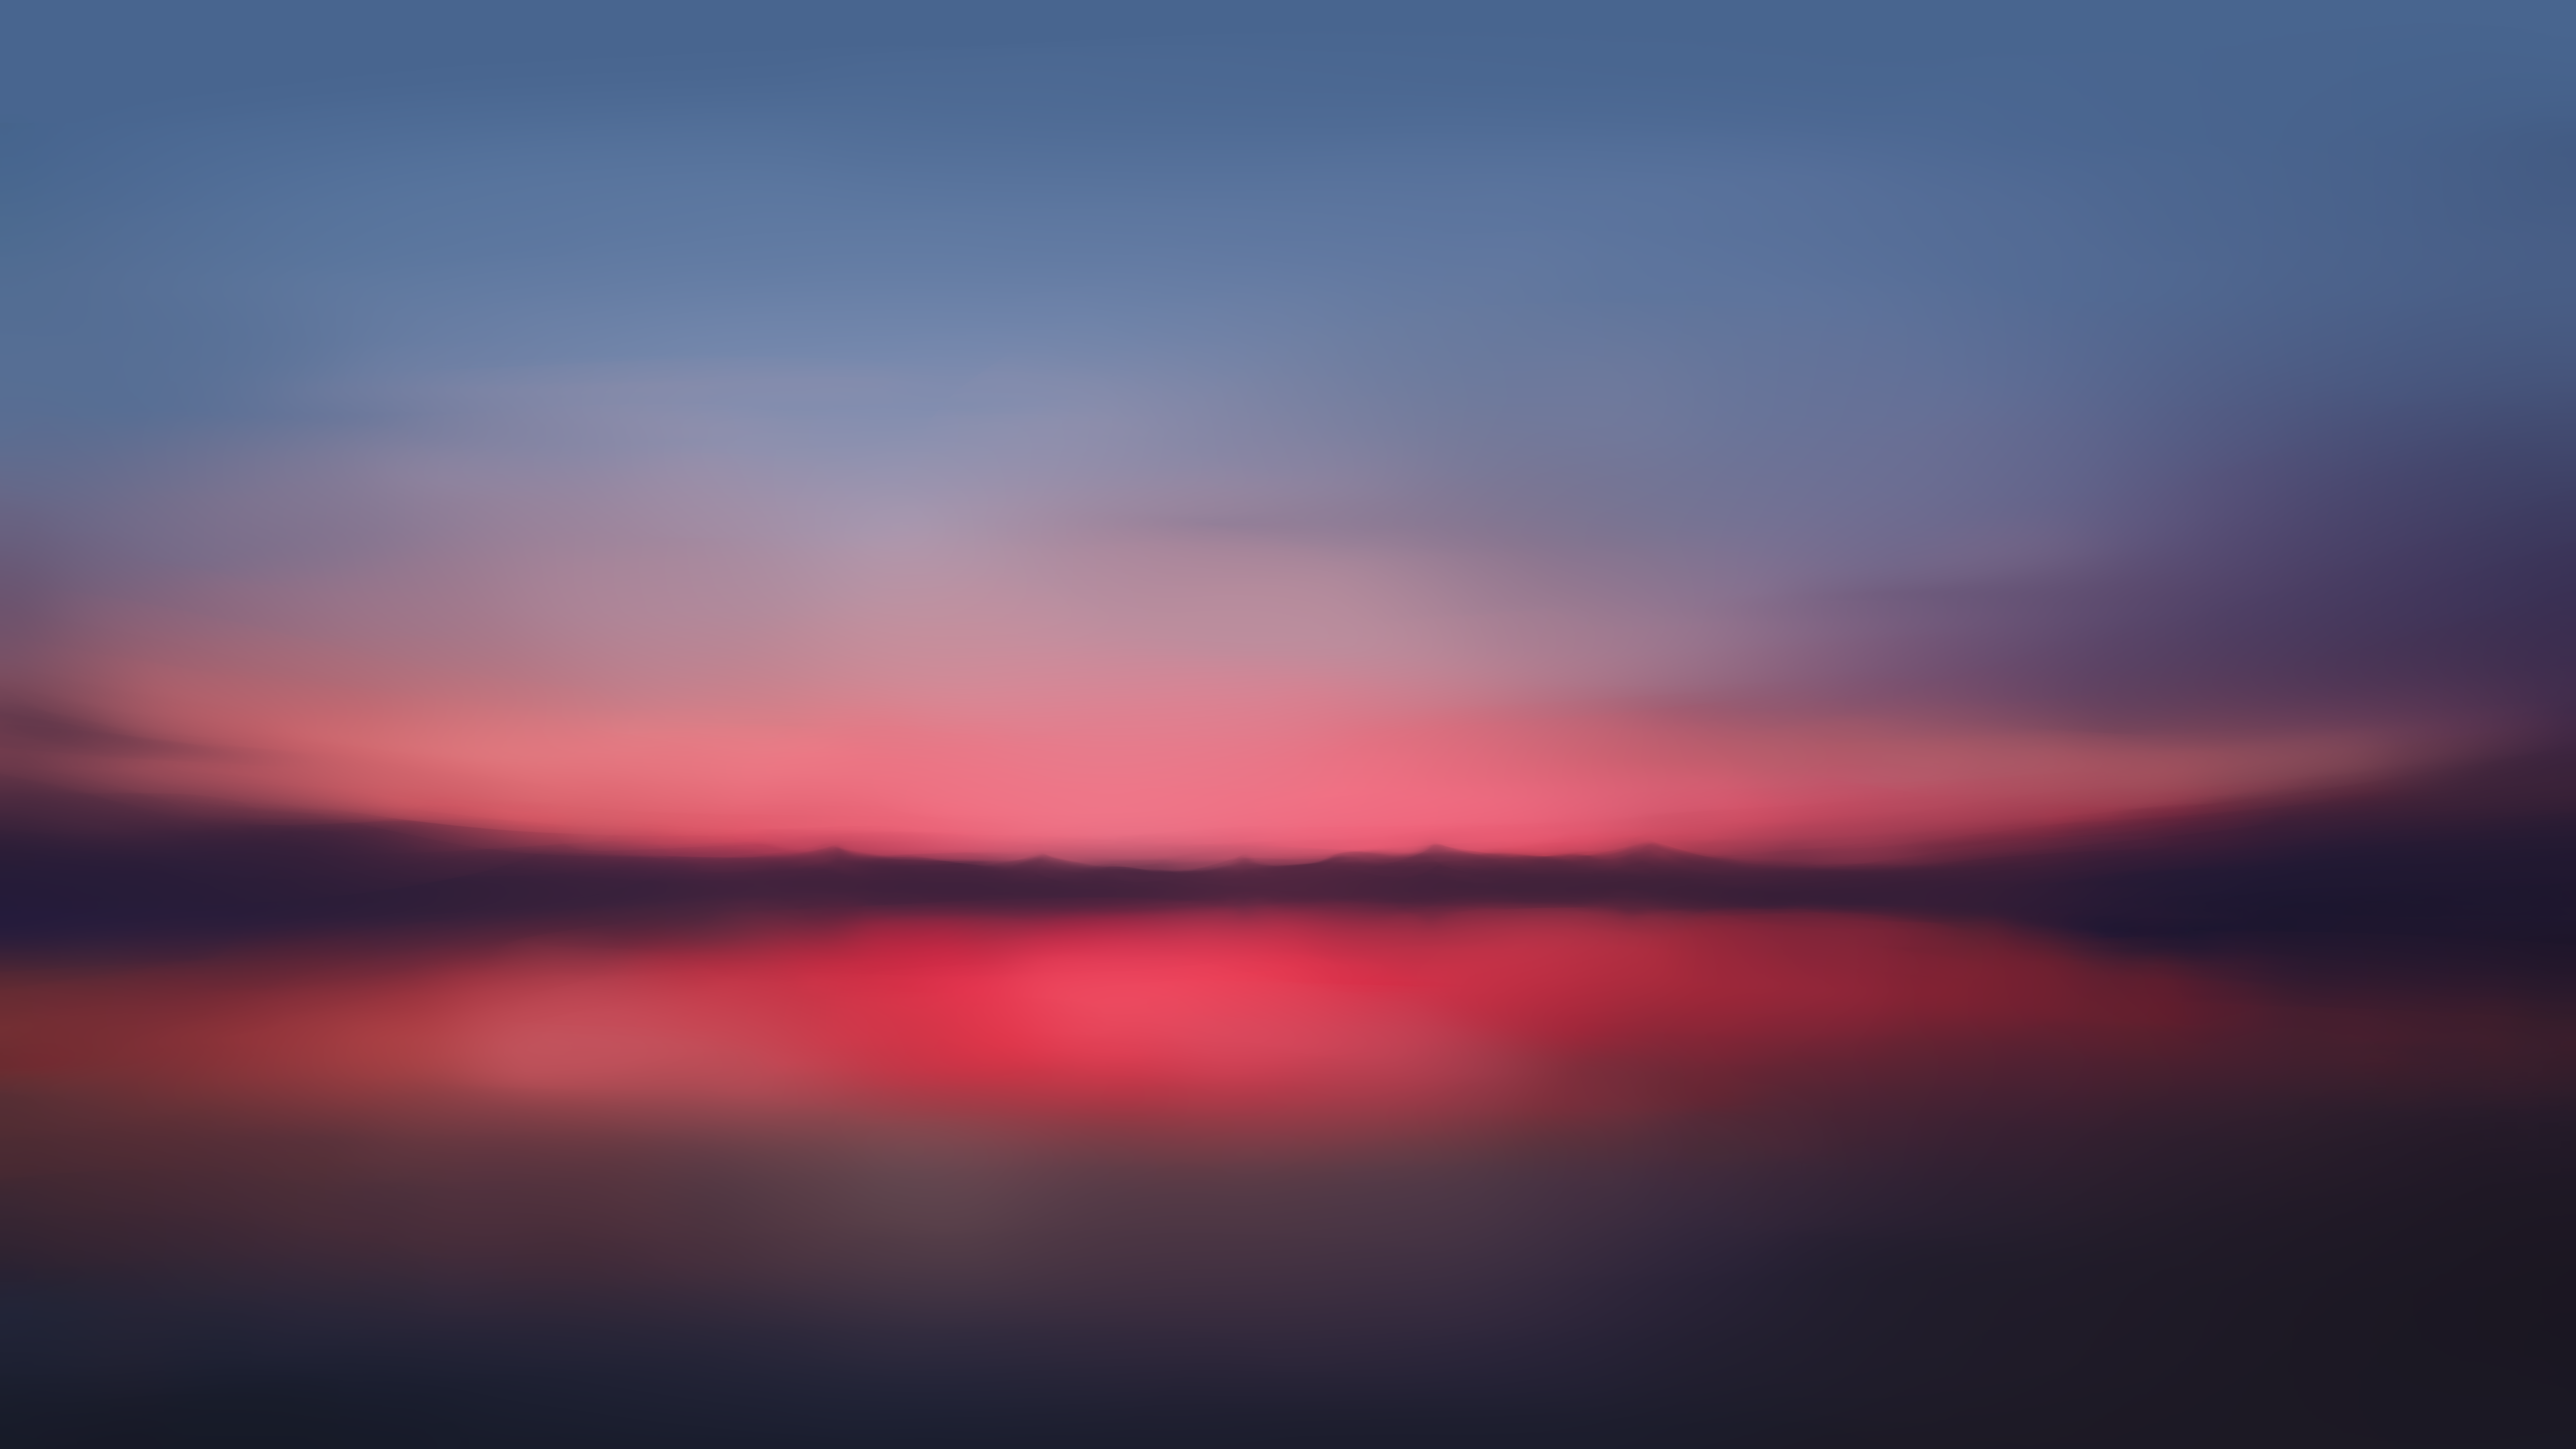 Colorful red sunset on the lake in the mountains 5K wallpaper by dpcdpc11